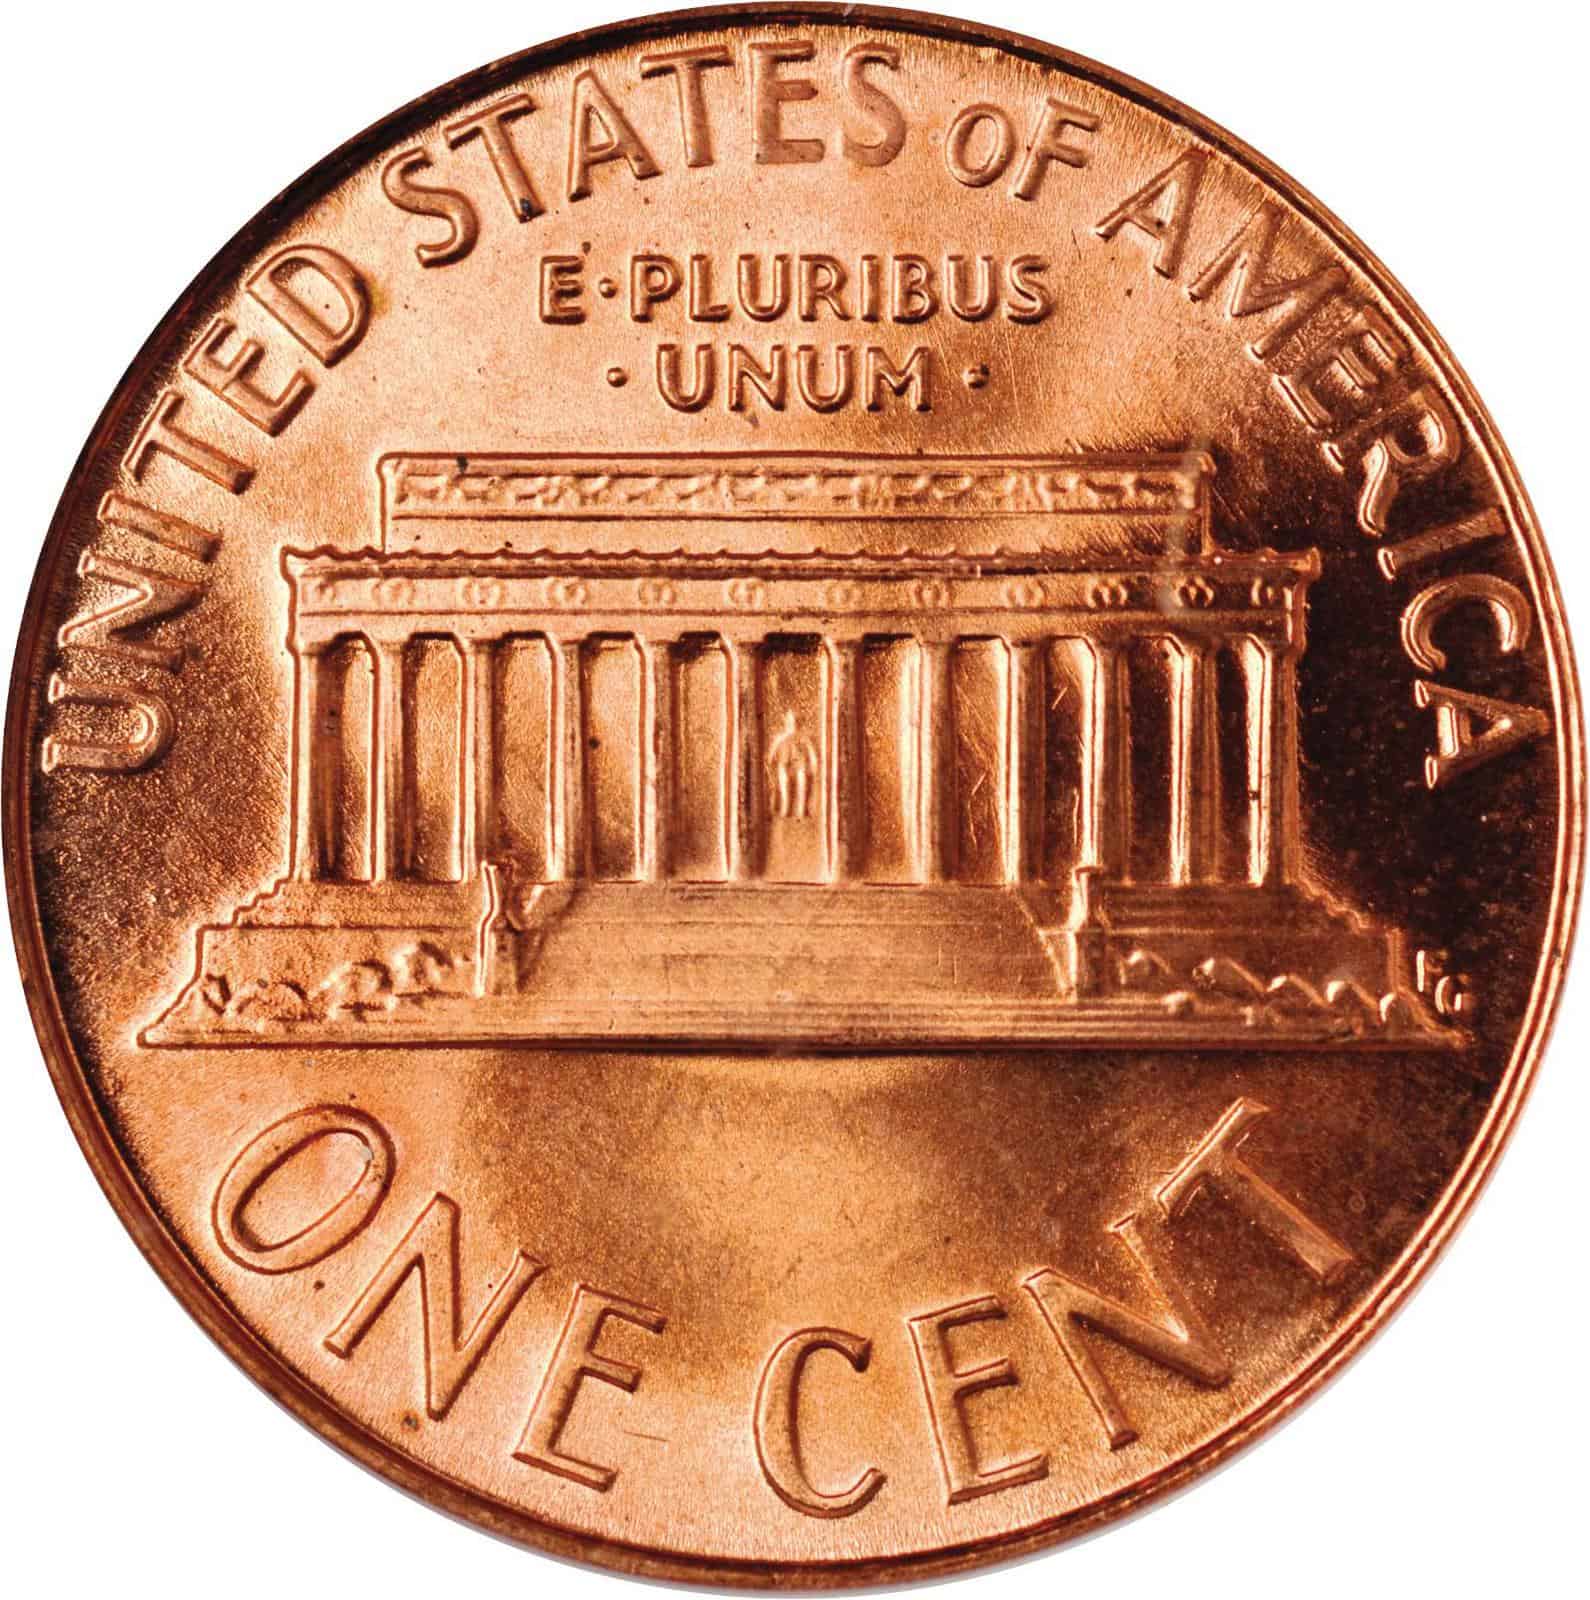 The Reverse of the 1988 Penny